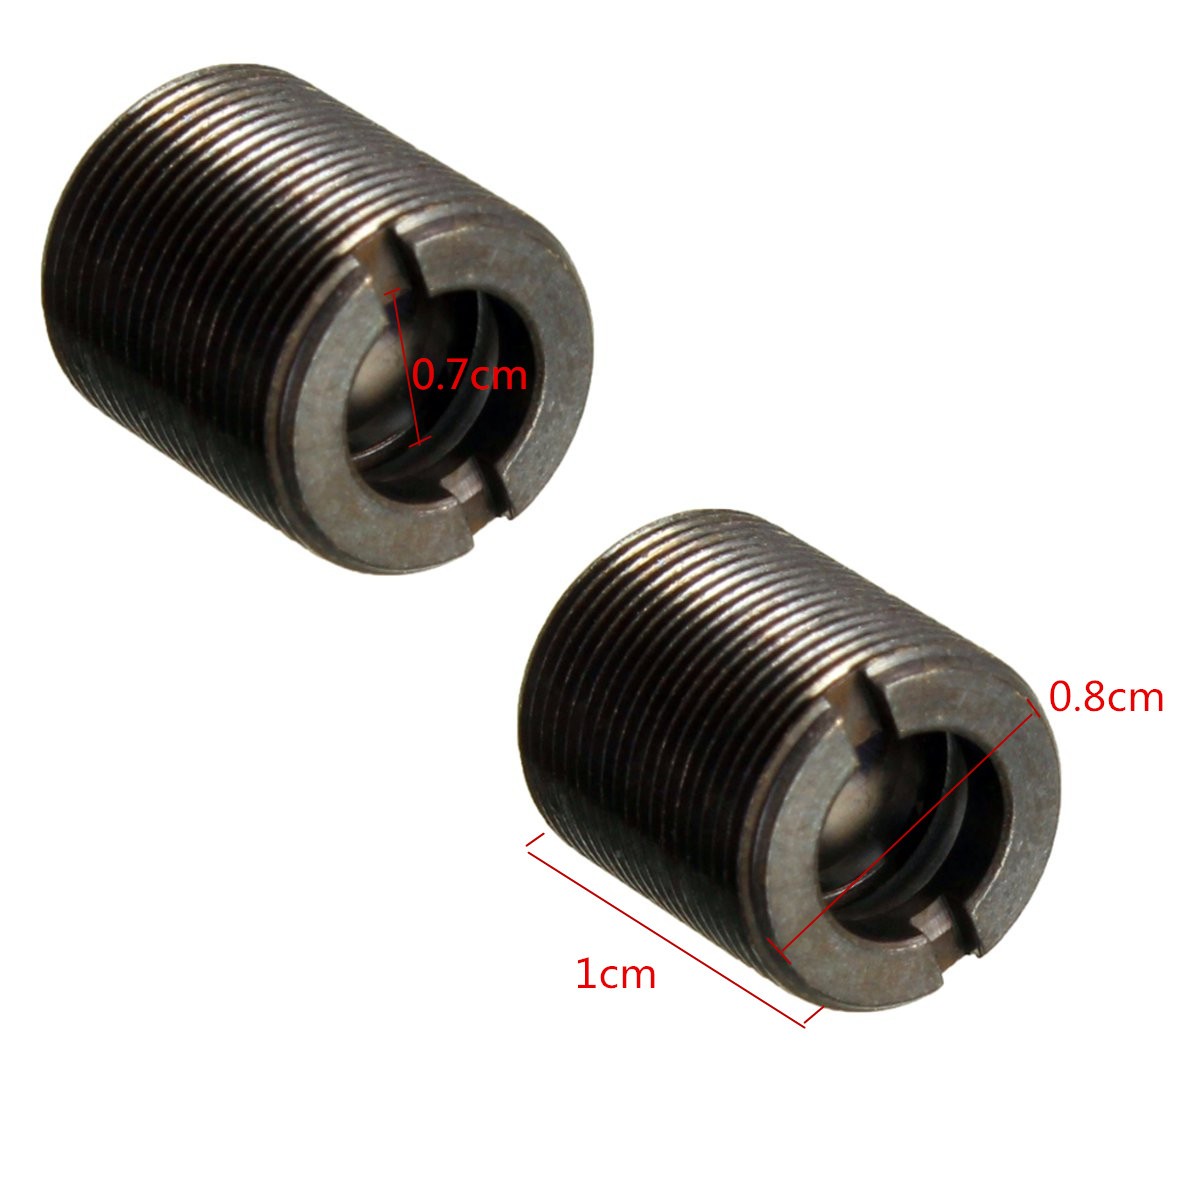 Triple-Glazing-Focusing-Lens-Collimating-Coated-Glass-Lens-Blue-Laser-Diode-405nm-450nm-1035471